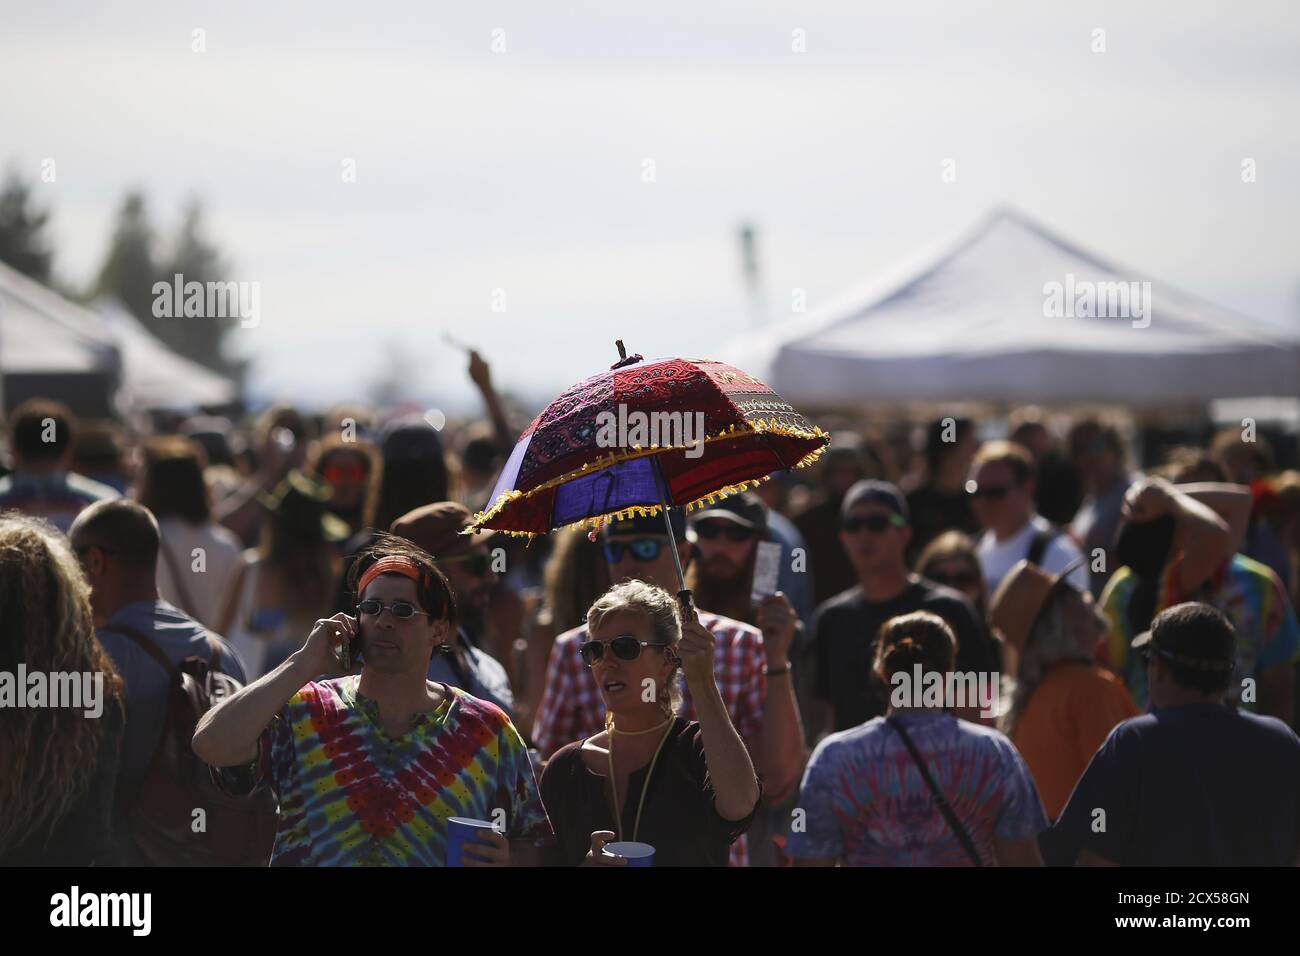 Grateful Dead fans tailgate in the parking lot before Grateful Dead's 'Fare Thee Well: Celebrating 50 Years of Grateful Dead' farewell tour at Levi's Stadium in Santa Clara, California June 27, 2015. REUTERS/Stephen Lam Stock Photo